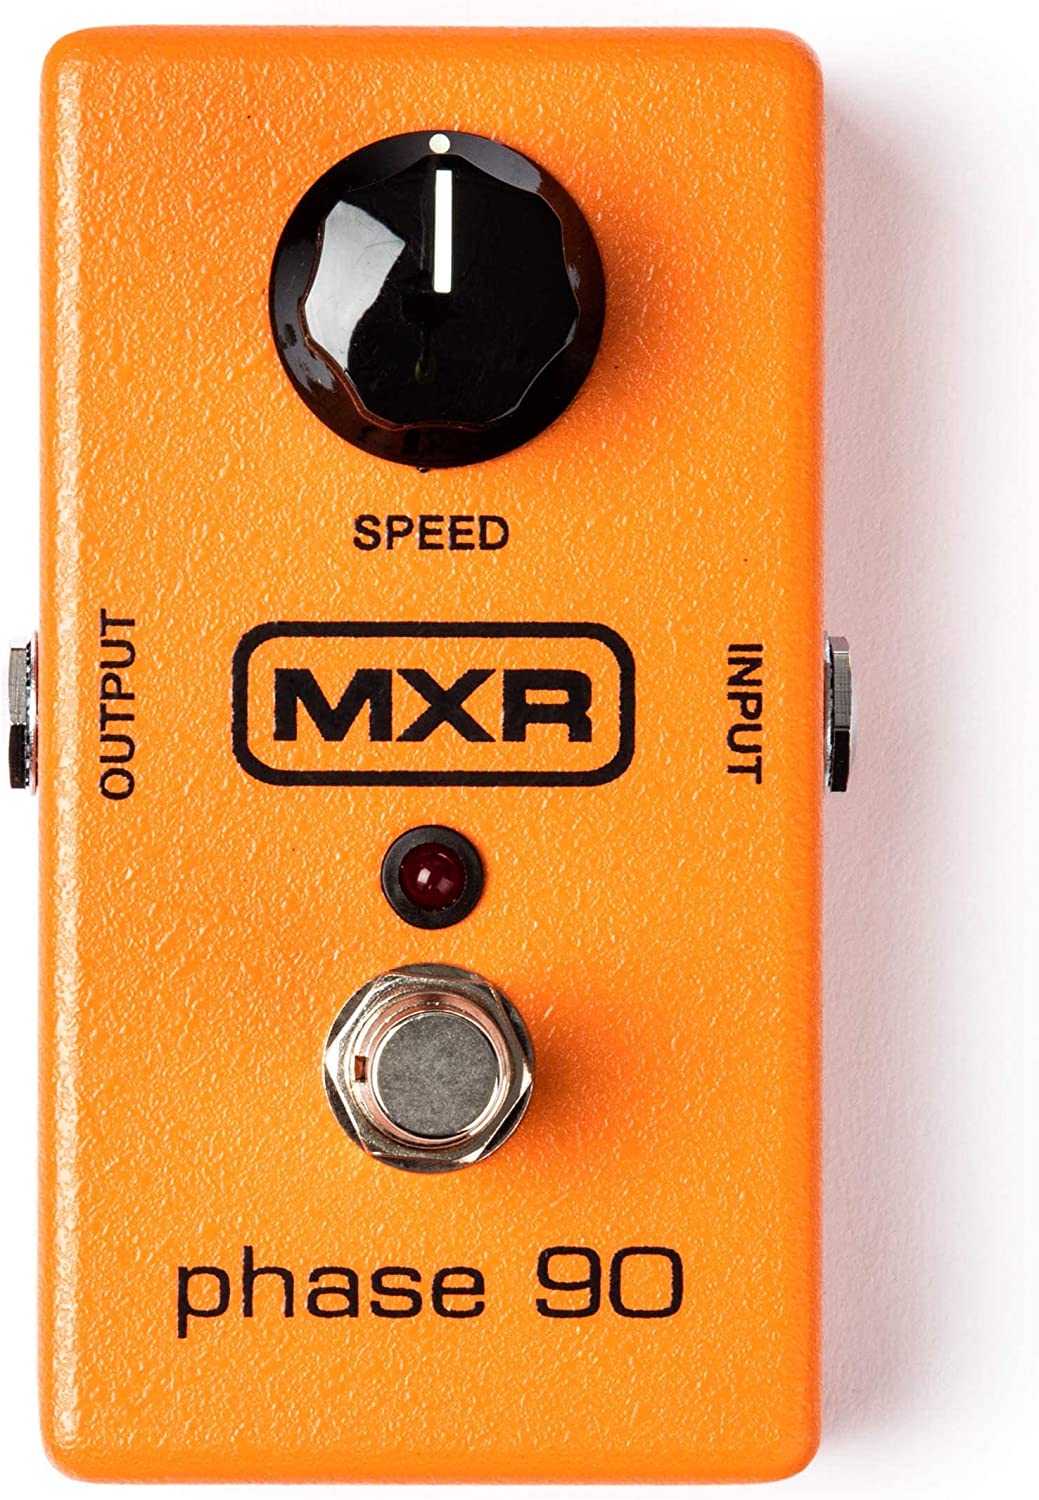 MXR Phase 90 Guitar Effects Pedal on a white background